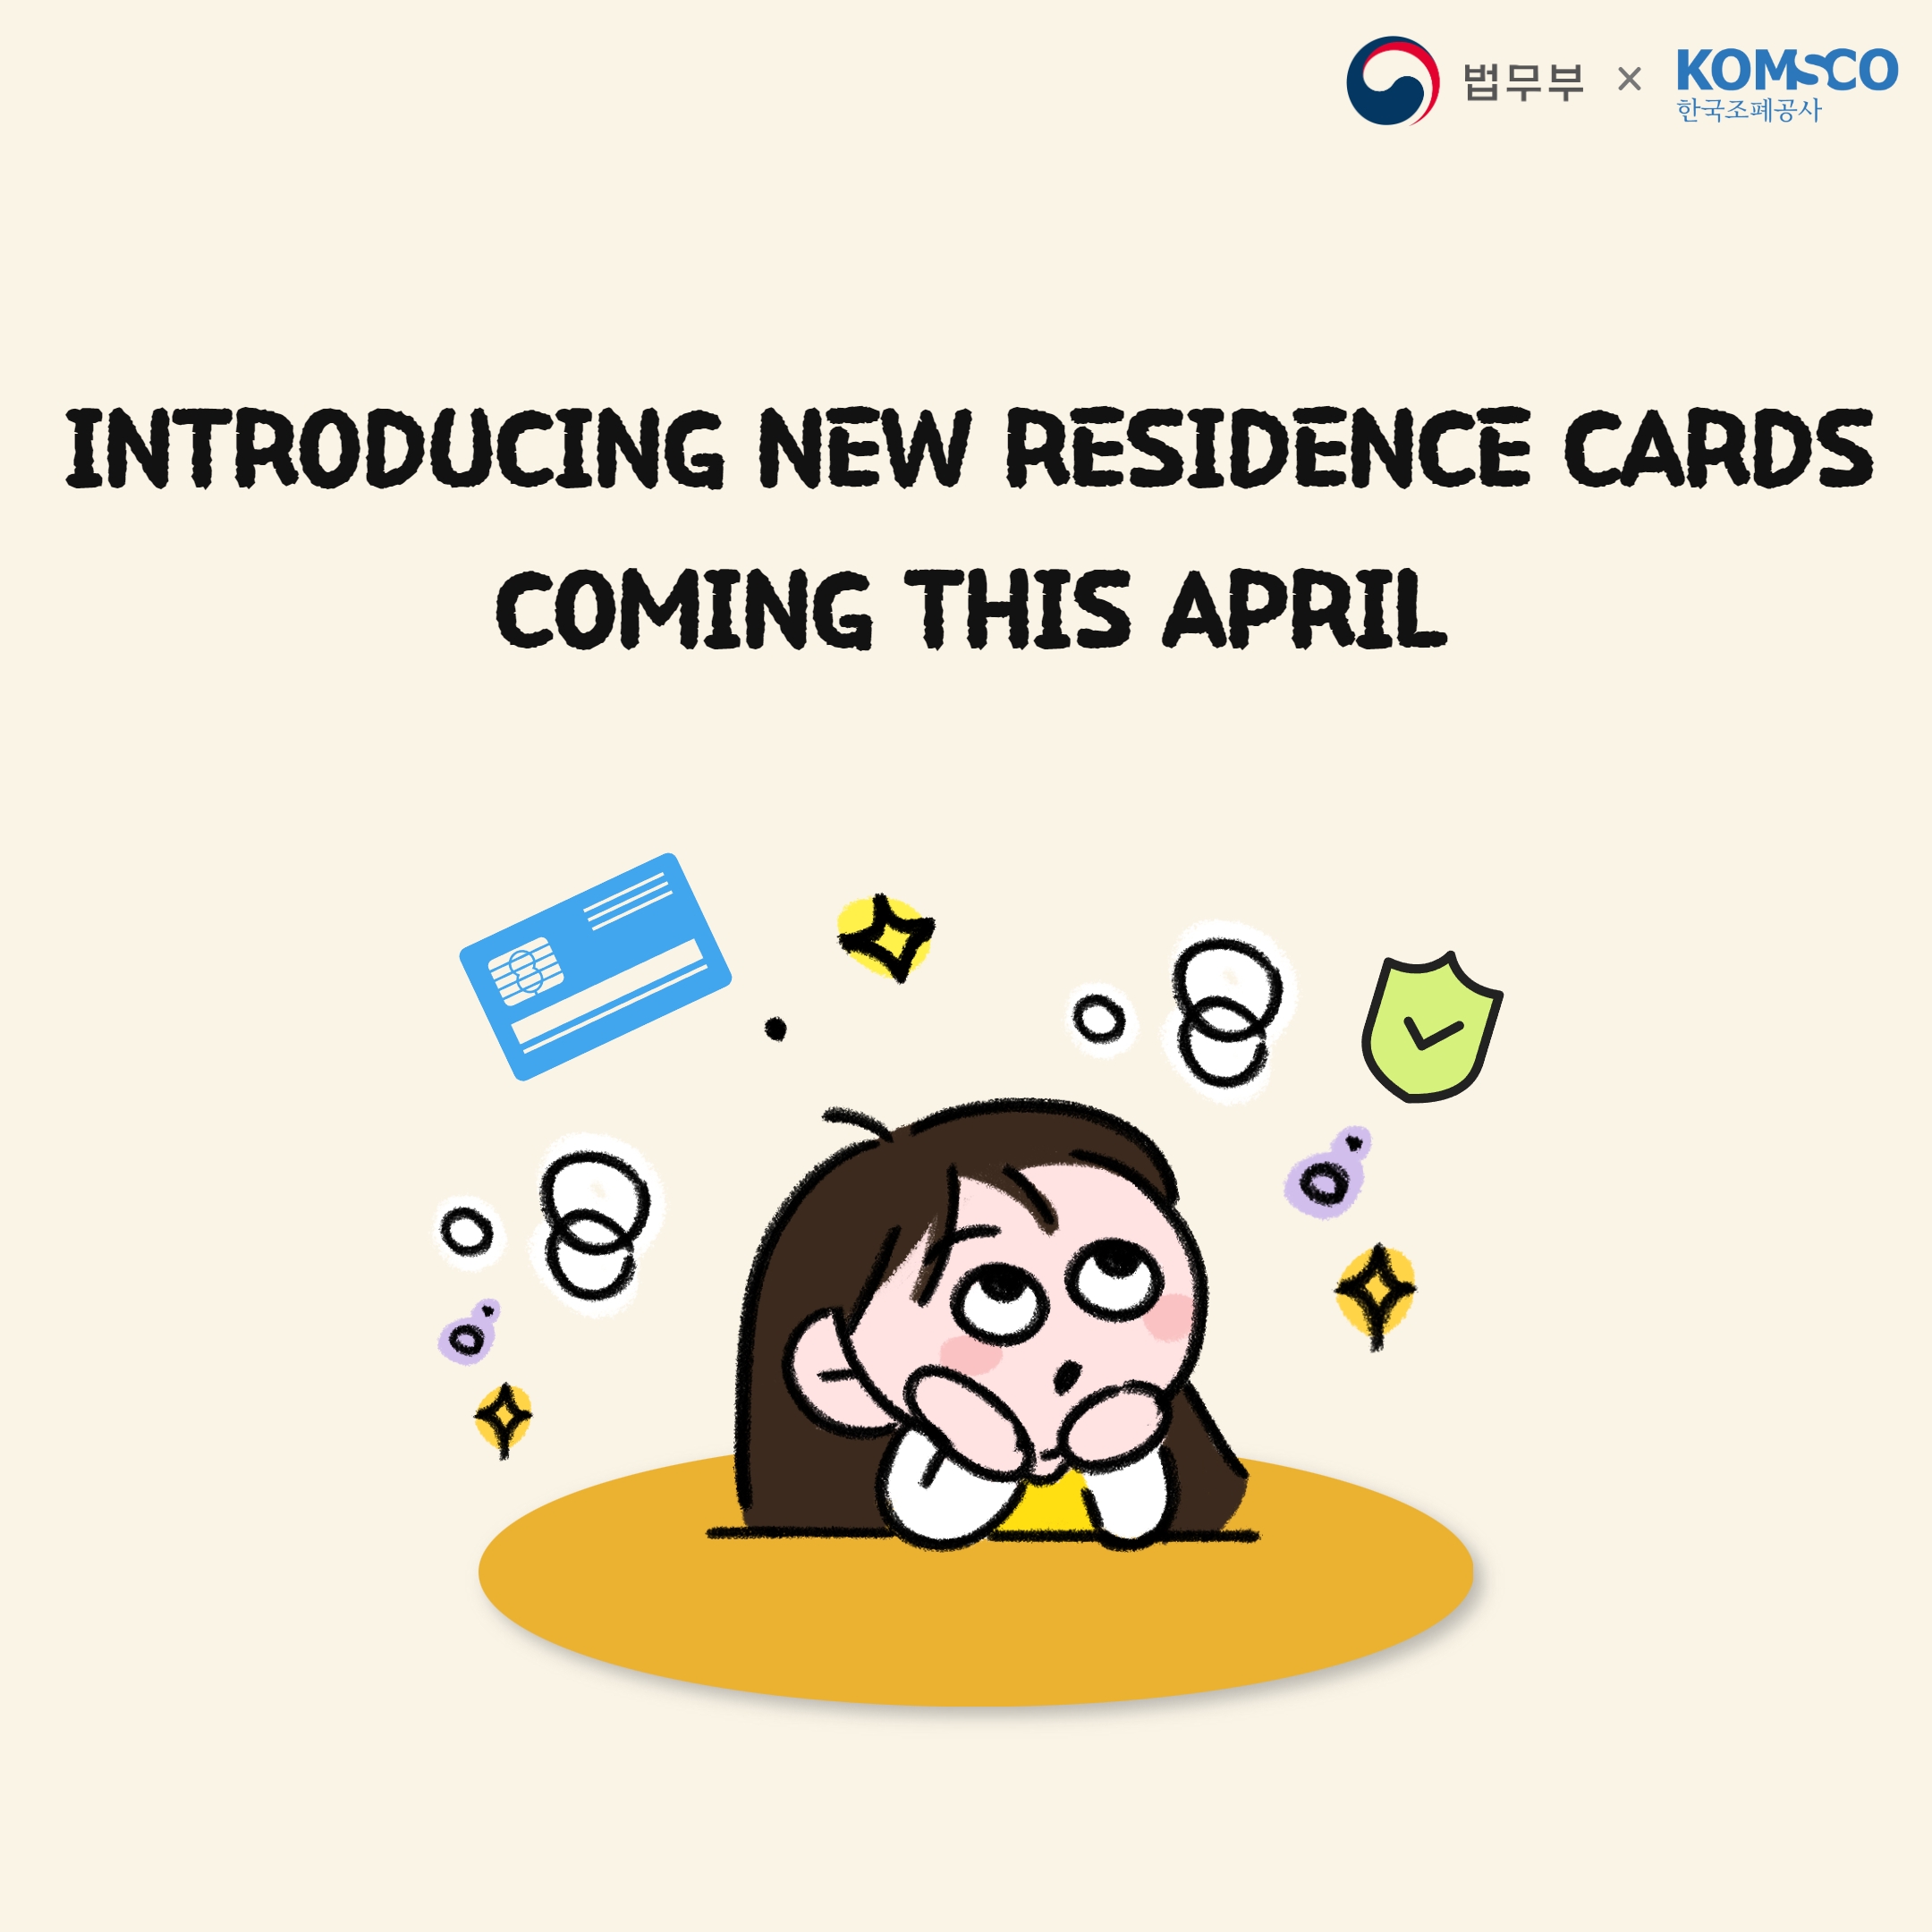 Introducing new residence cards coming this April